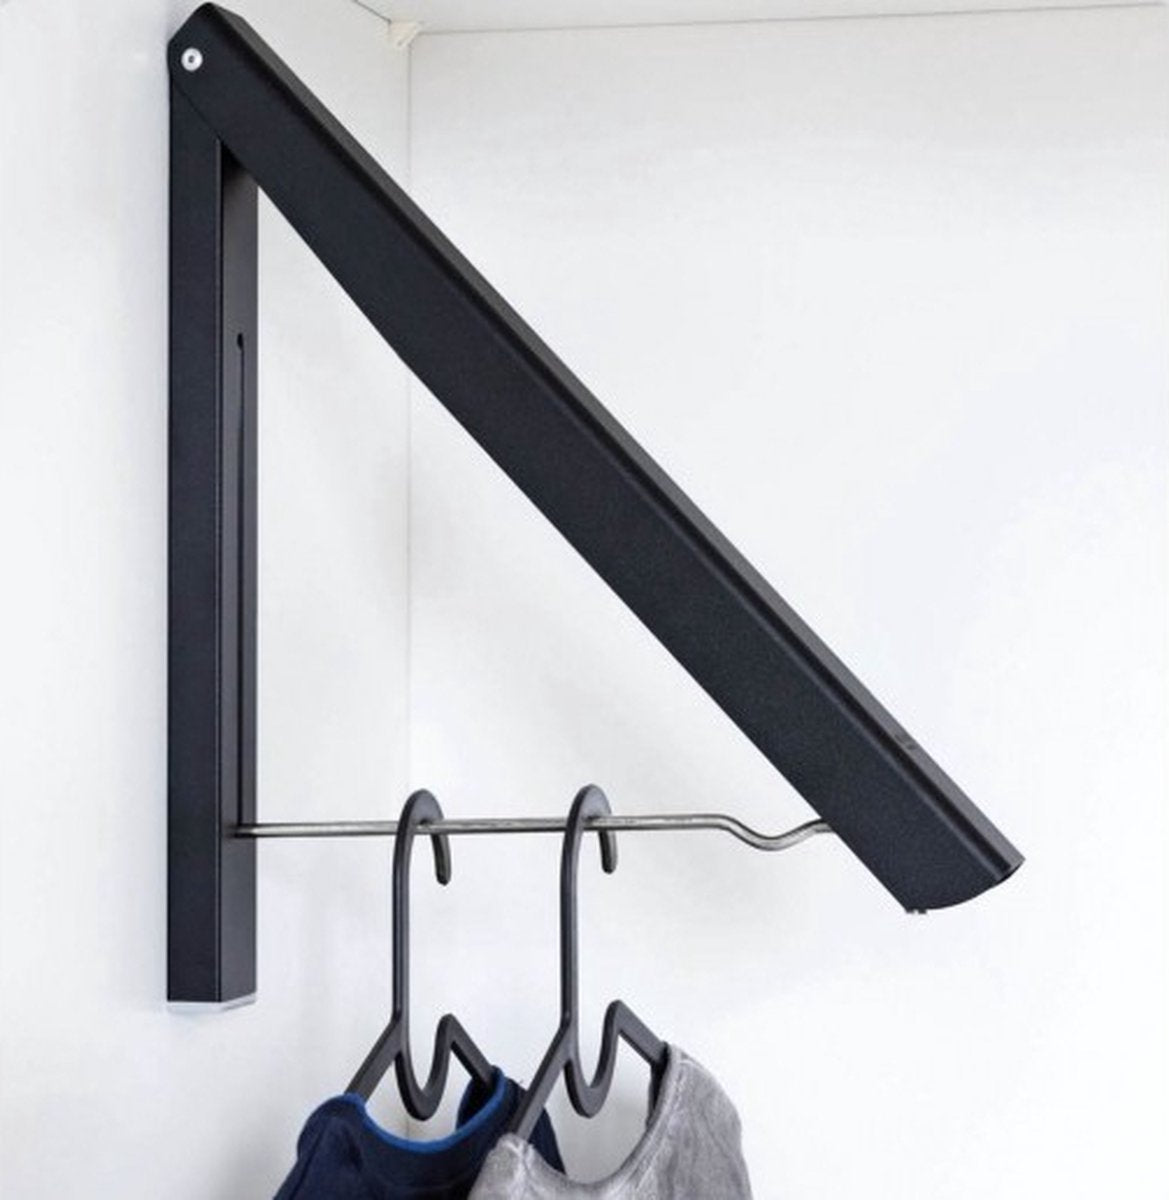 Milano Luxurious Collapsible drying rack clothes hanger wall mounted 2 pieces Black